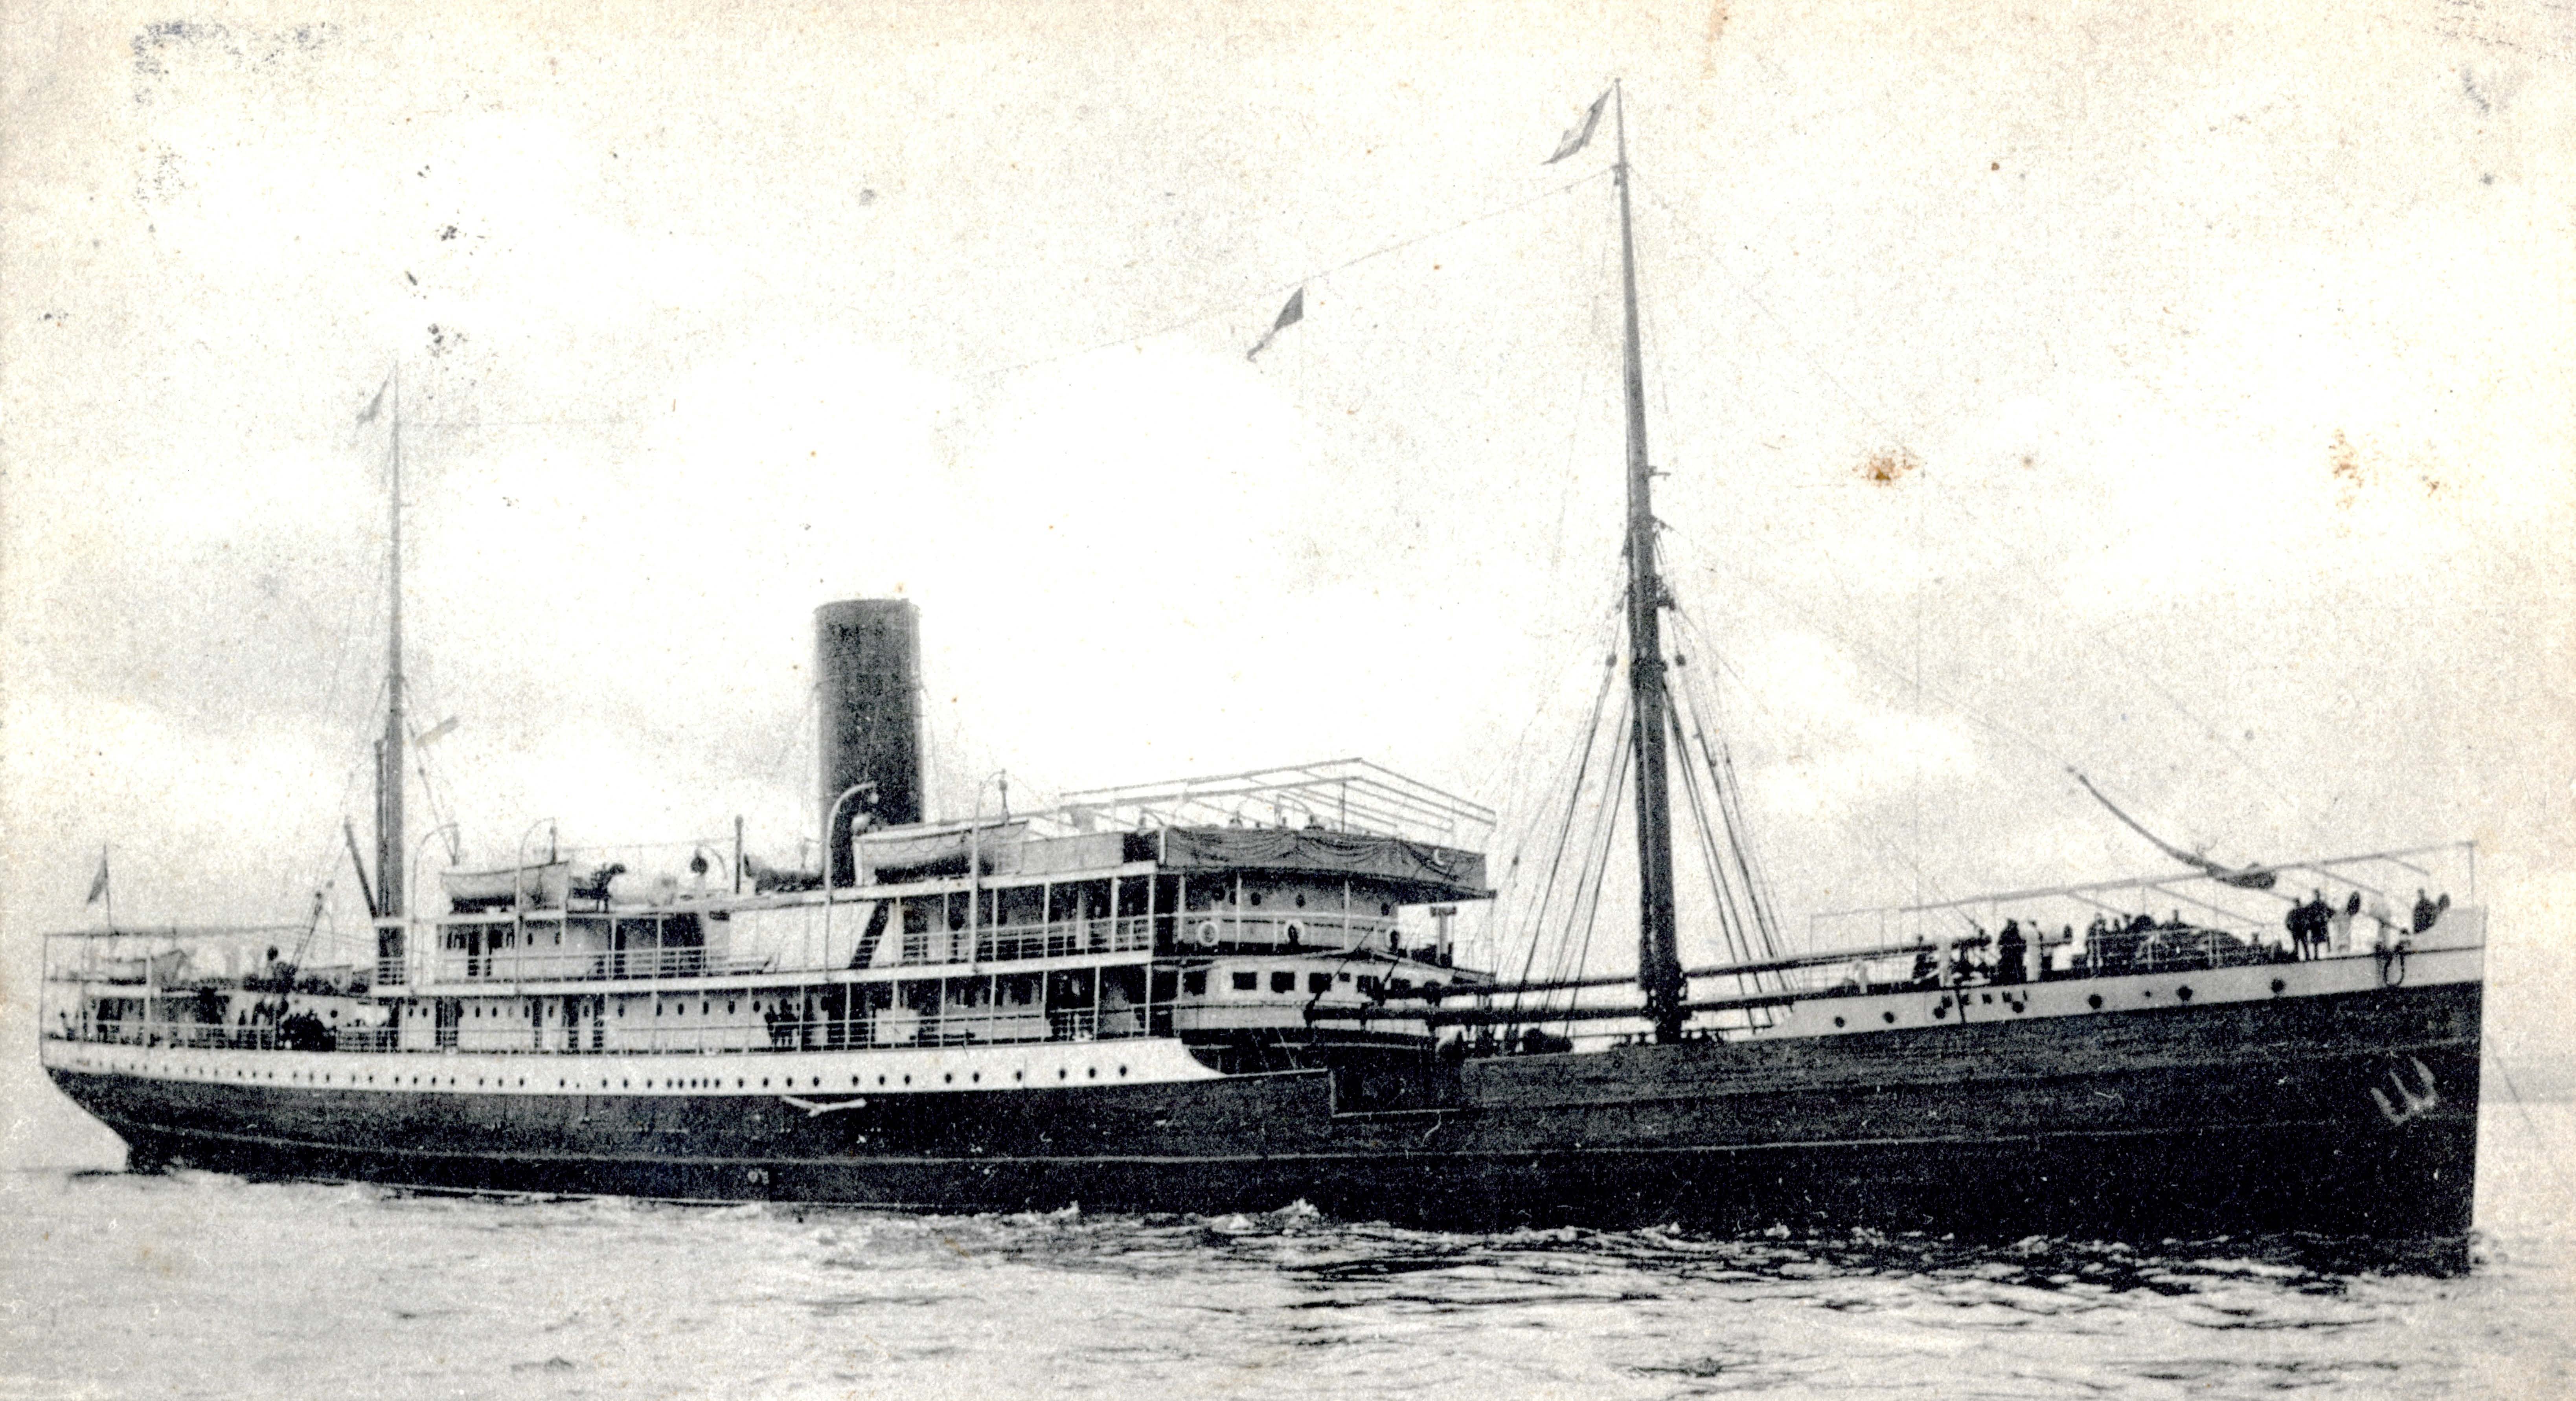 The Mendi was built in Glasgow and in 1905 registered to the British & African Steam Navigation Co Ltd. She is shown here in pre-war days in use as a mail ship. Image courtesy of the John Gribble Collection